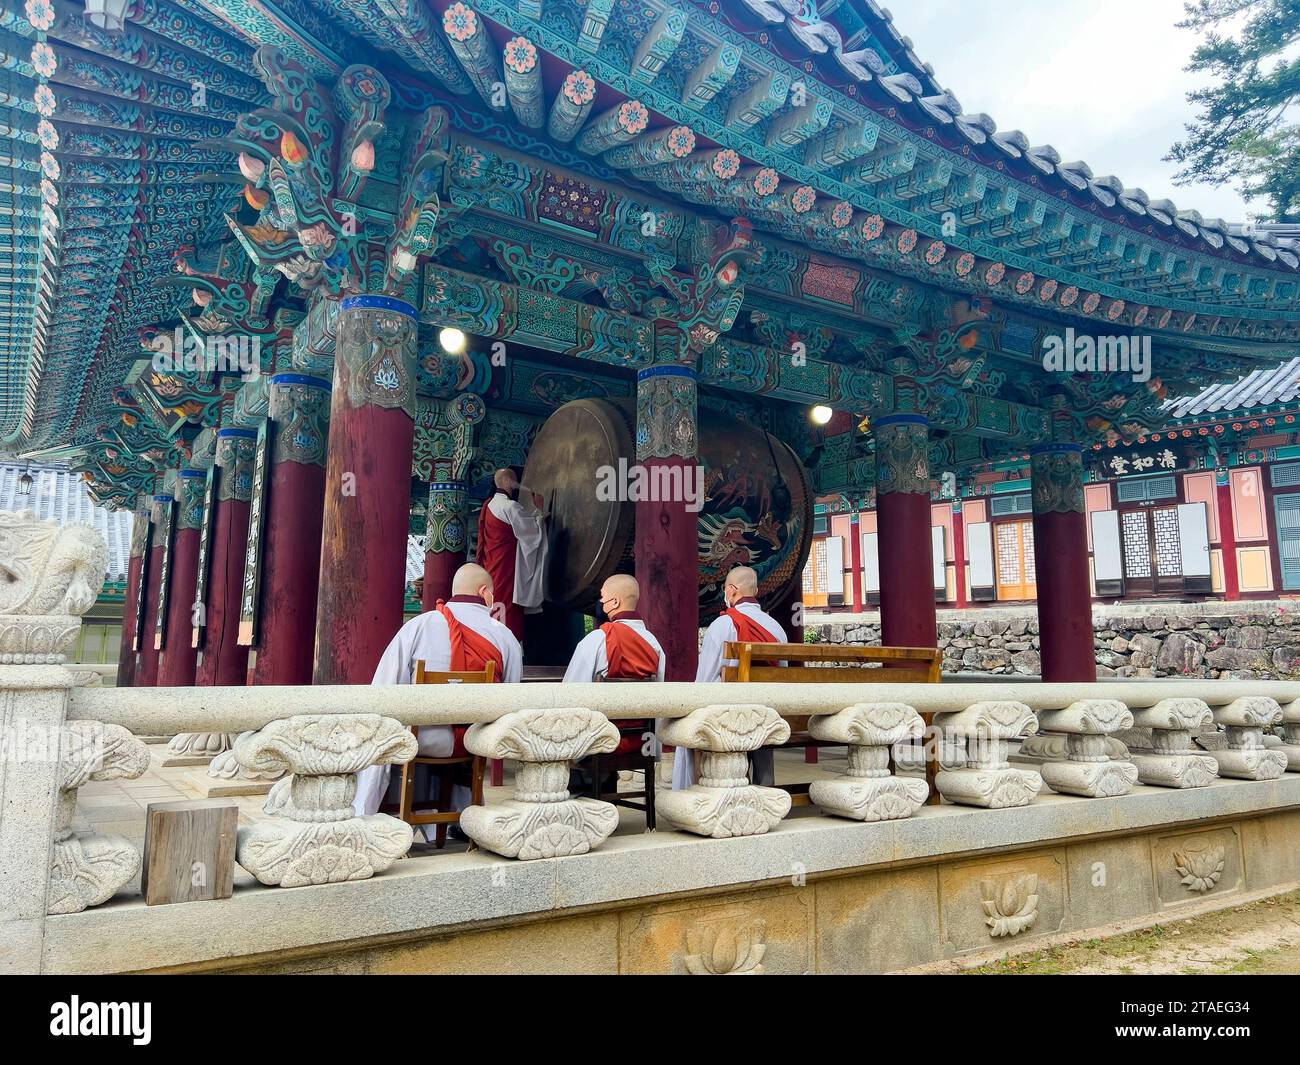 South Korea, South Gyeongsang (Gyeongsangnam do), Gayasan, drum ceremony performed by monks before evening prayer at the important Buddhist temple of Haeinsa listed as a UNESCO world heritage site Stock Photo